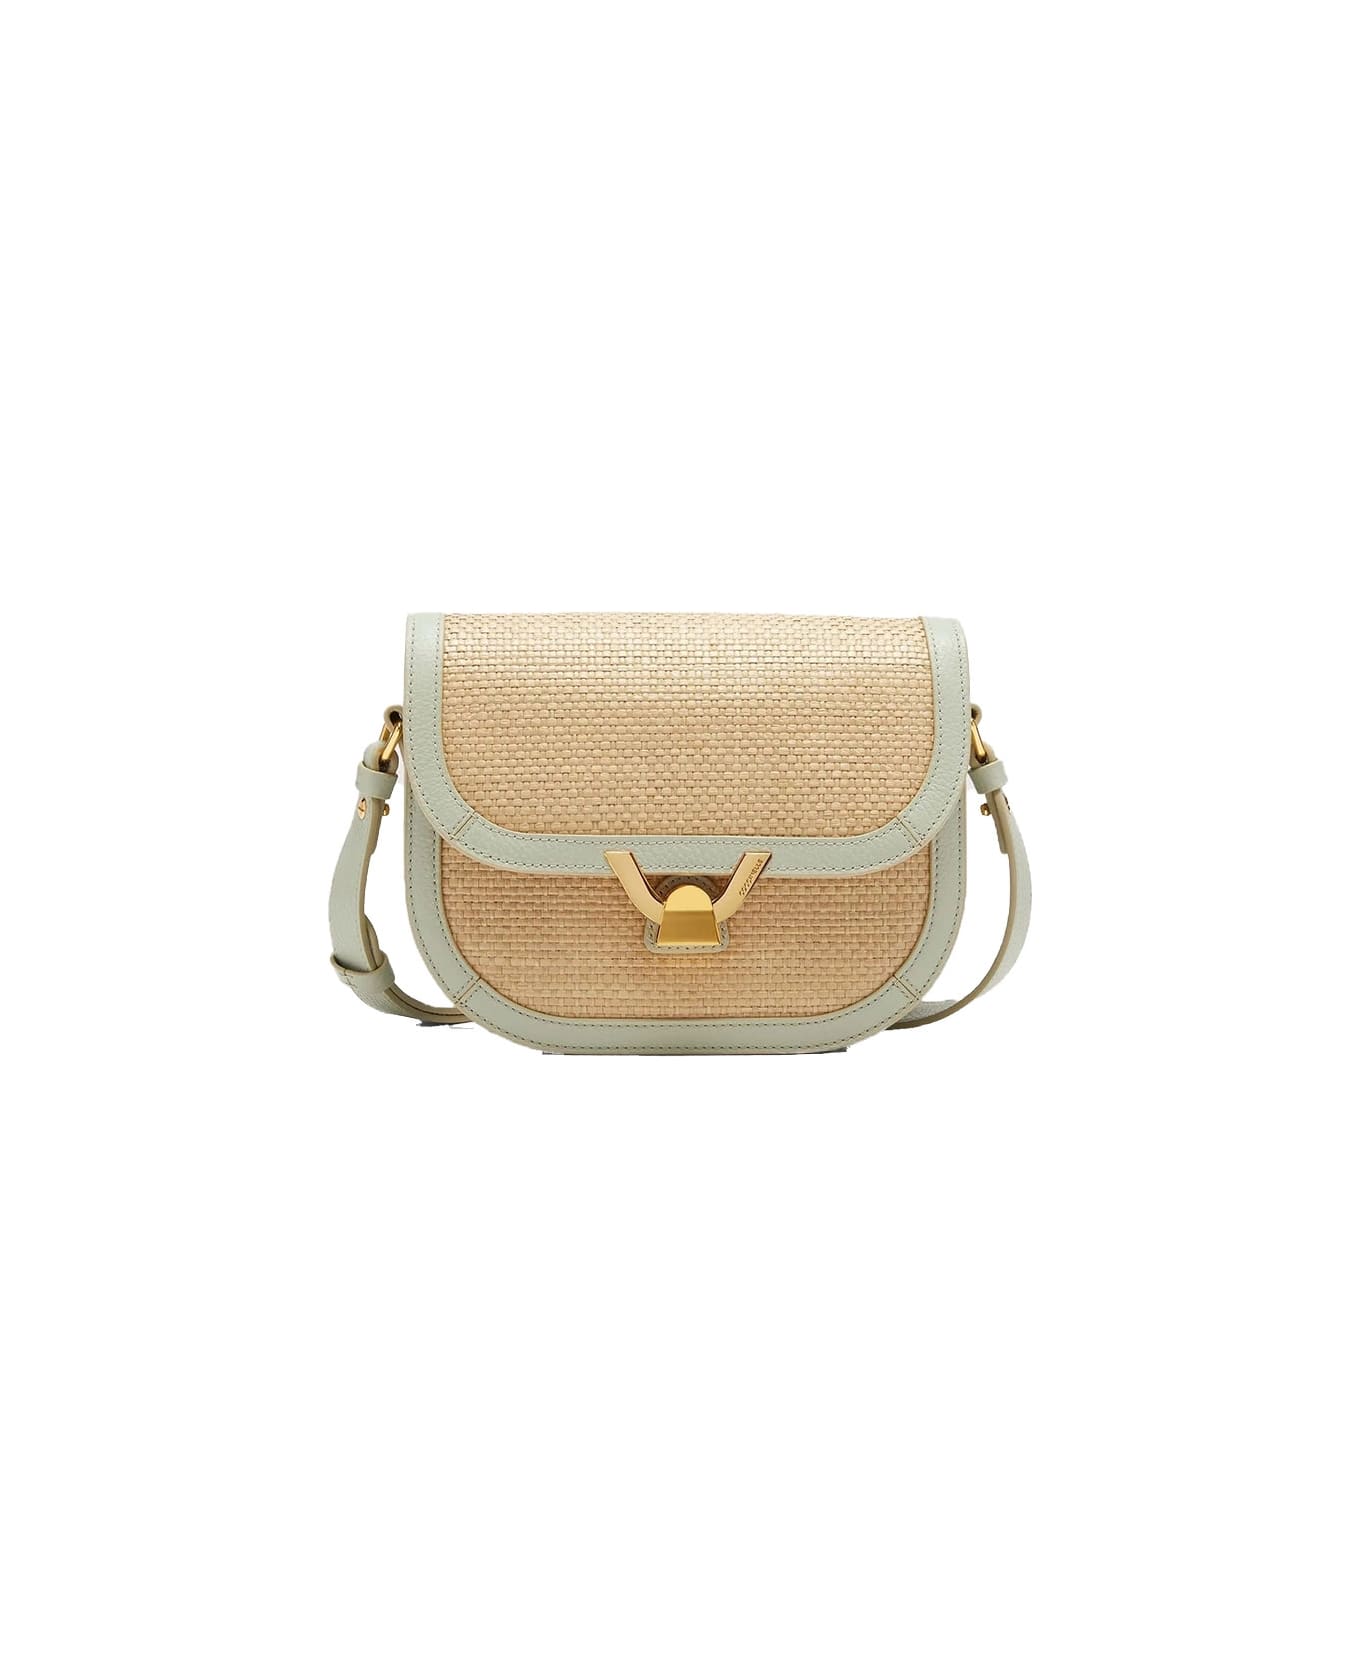 Coccinelle Dew Straw Small Bag - Natural/cela gr.